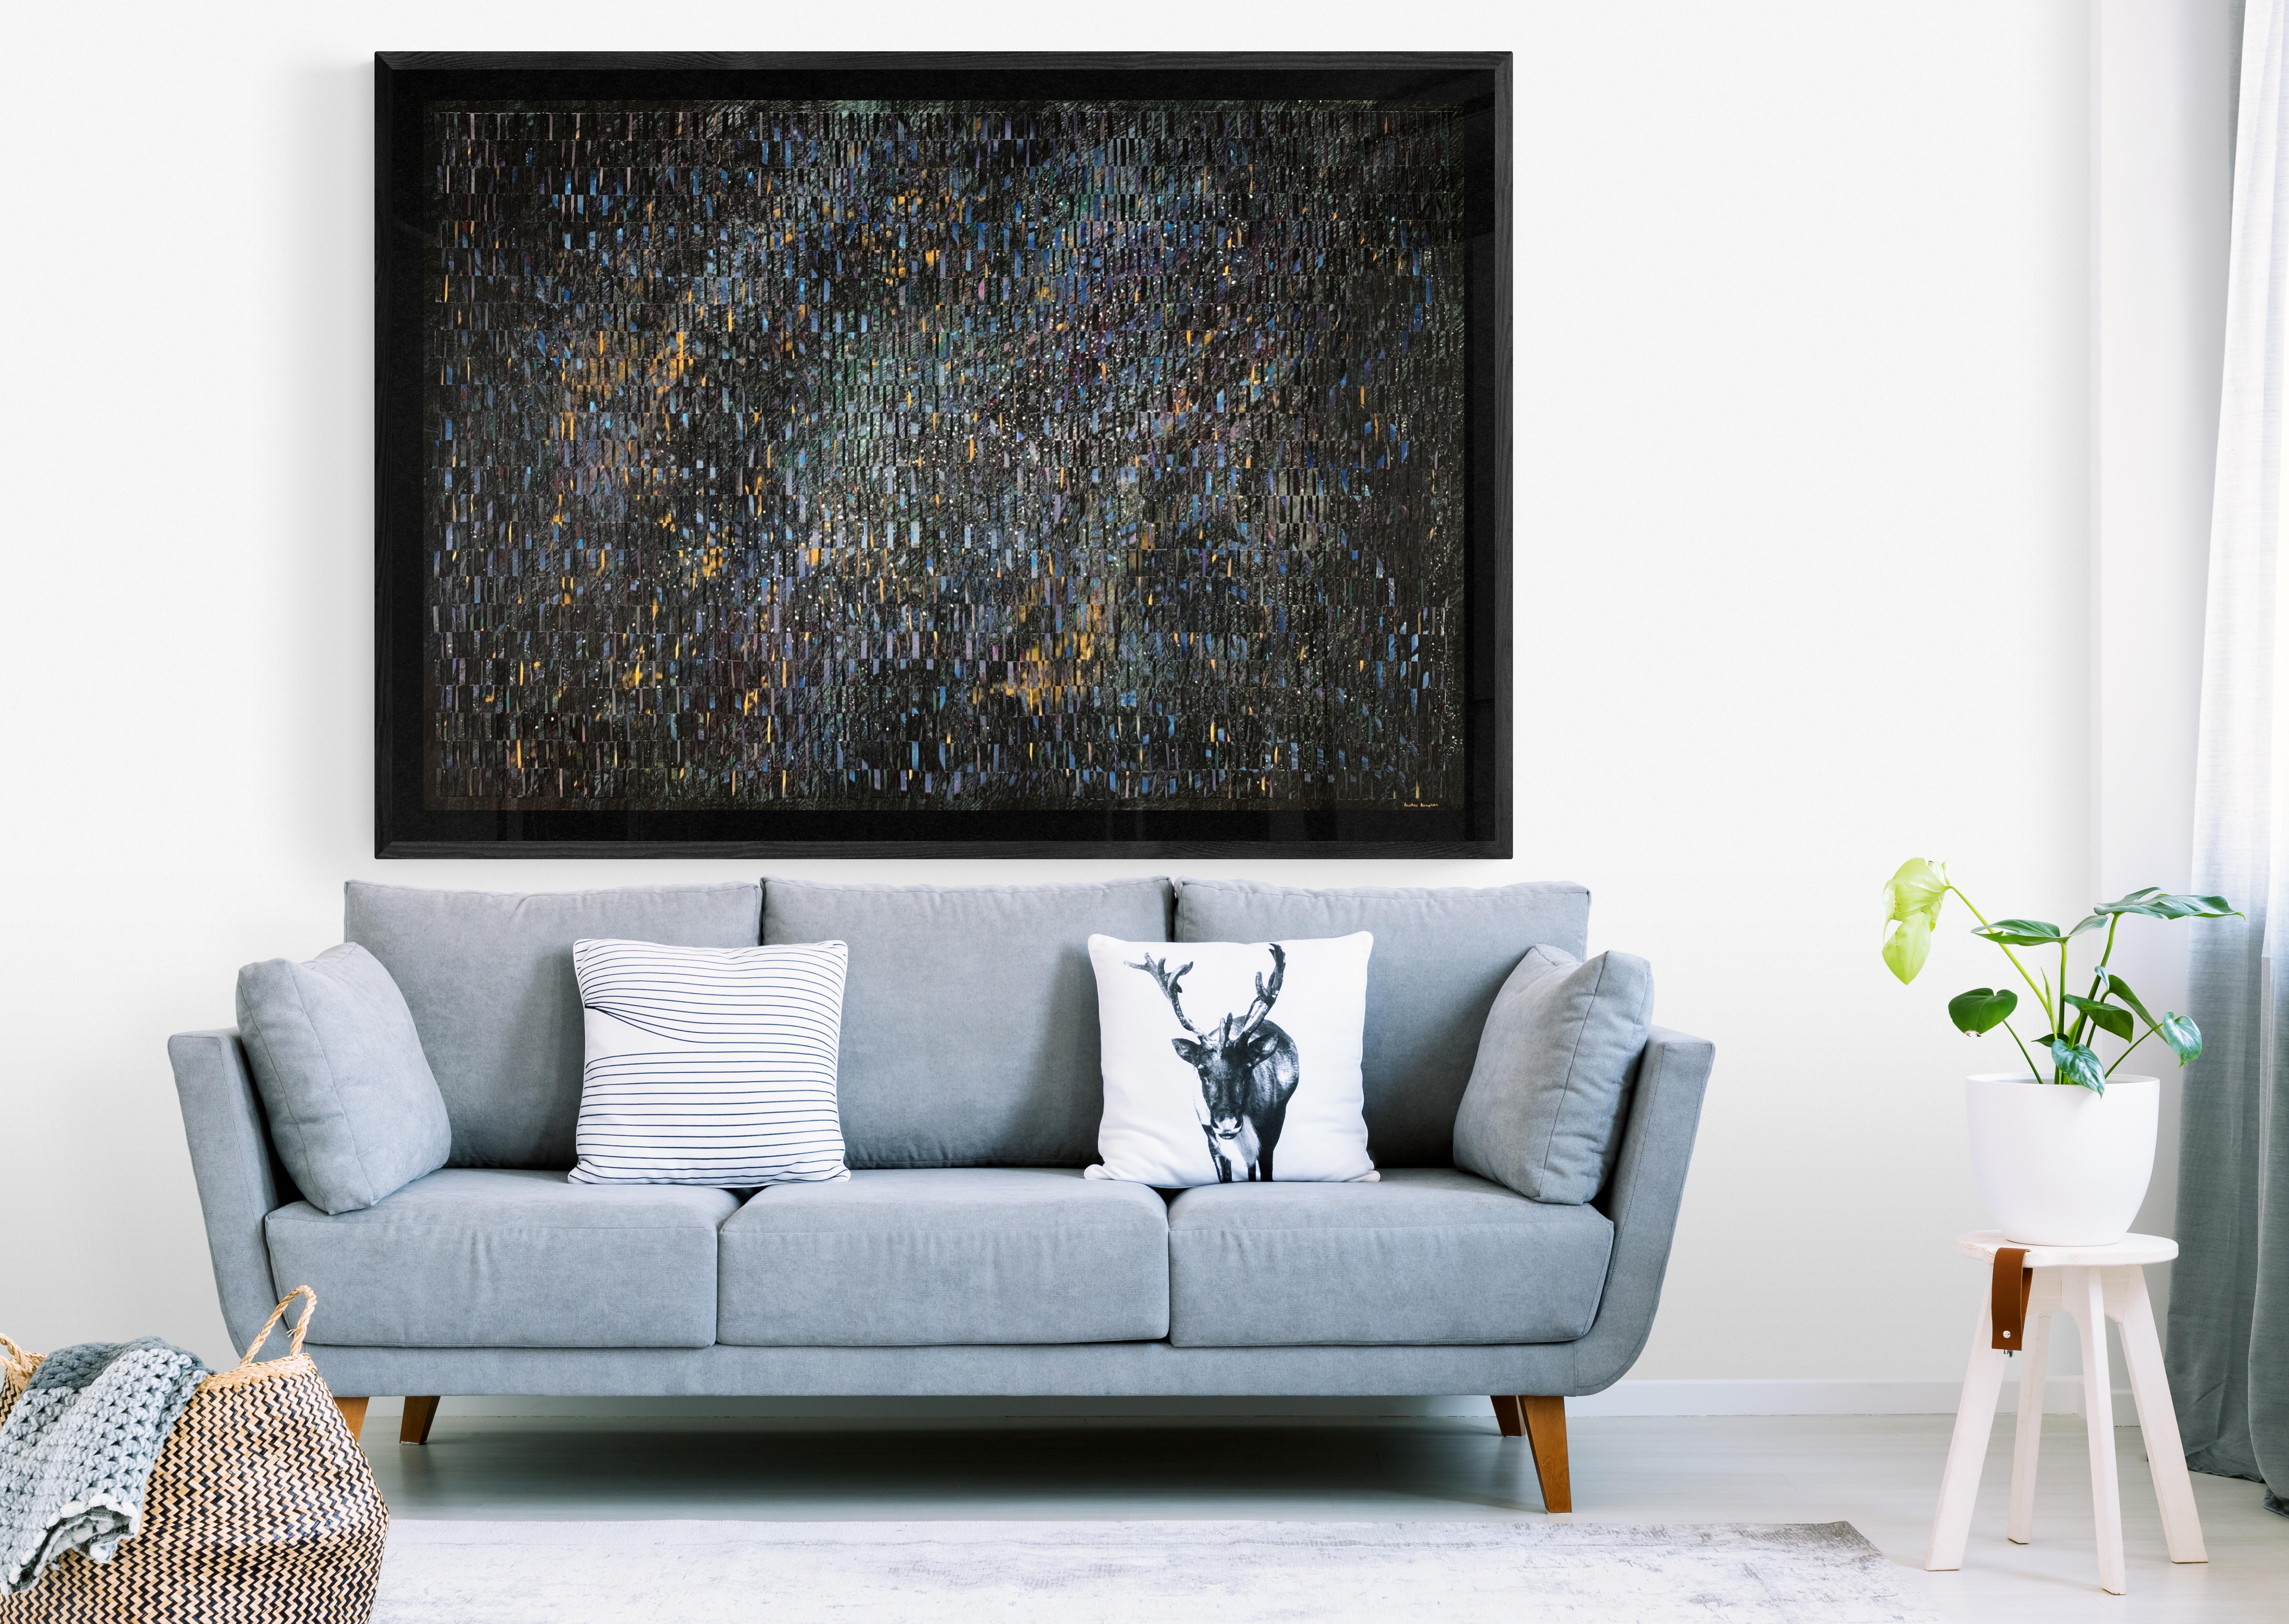 This unique artwork is created through interweaving strips of painted fabriano paper in order to create a complex composition with depth and texture. The artwork is framed and floated to the backboard. The dimensions of 120 x 160 cm are that of the